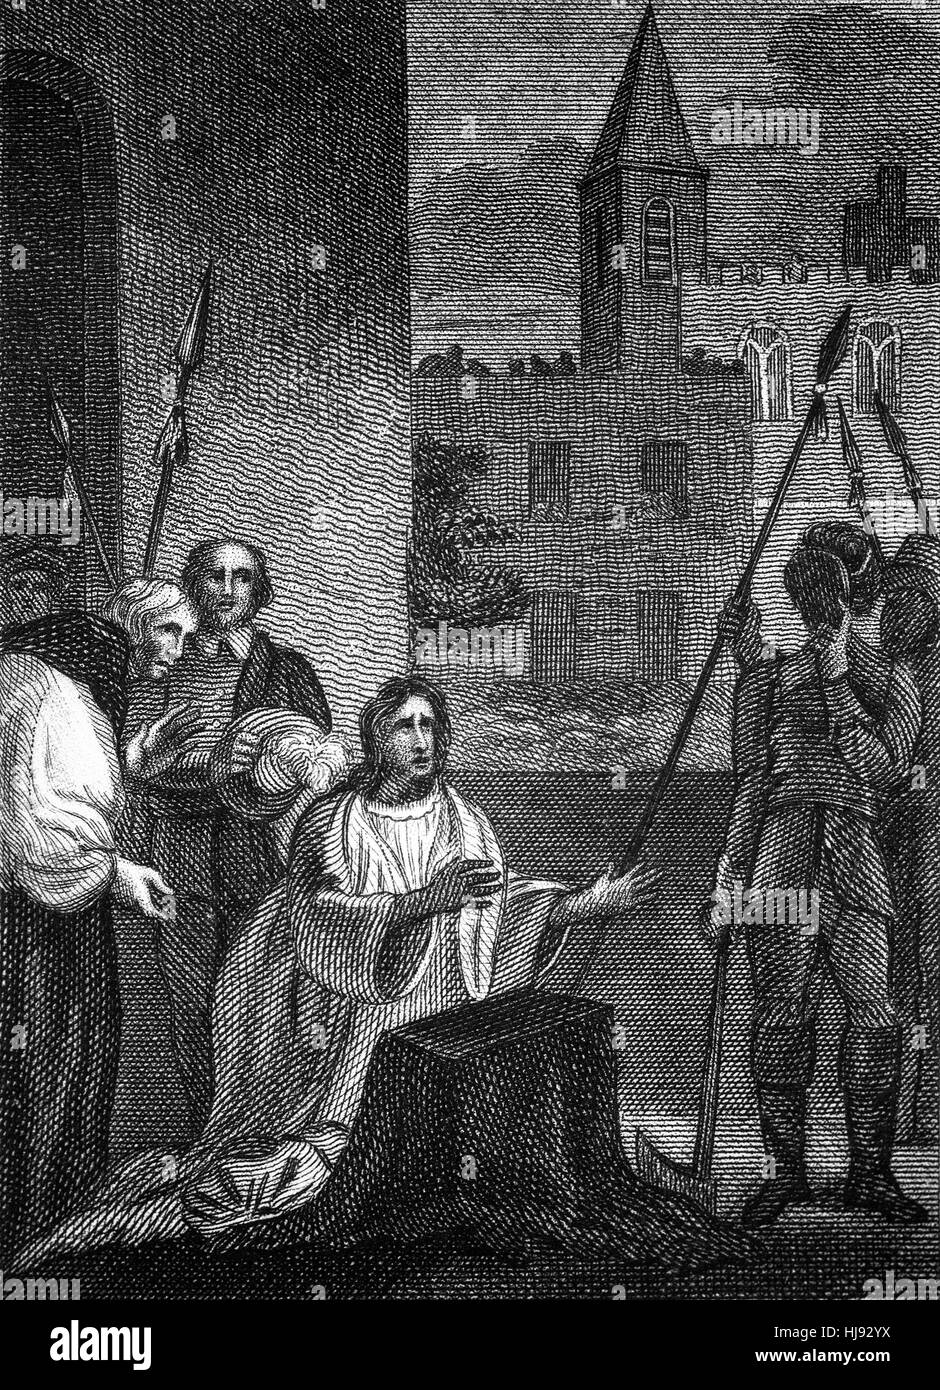 The execution of King Charles I (1600 – 1649) was scheduled for Tuesday, 30 January 1649. At  about 2:00 p.m. Charles put his head on the block after saying a prayer and signalled the executioner when he was ready by stretching out his hands. He was beheaded with one clean stroke, following which some of the assembled crowd dipped their handkerchiefs in the king's blood as a memento. Stock Photo